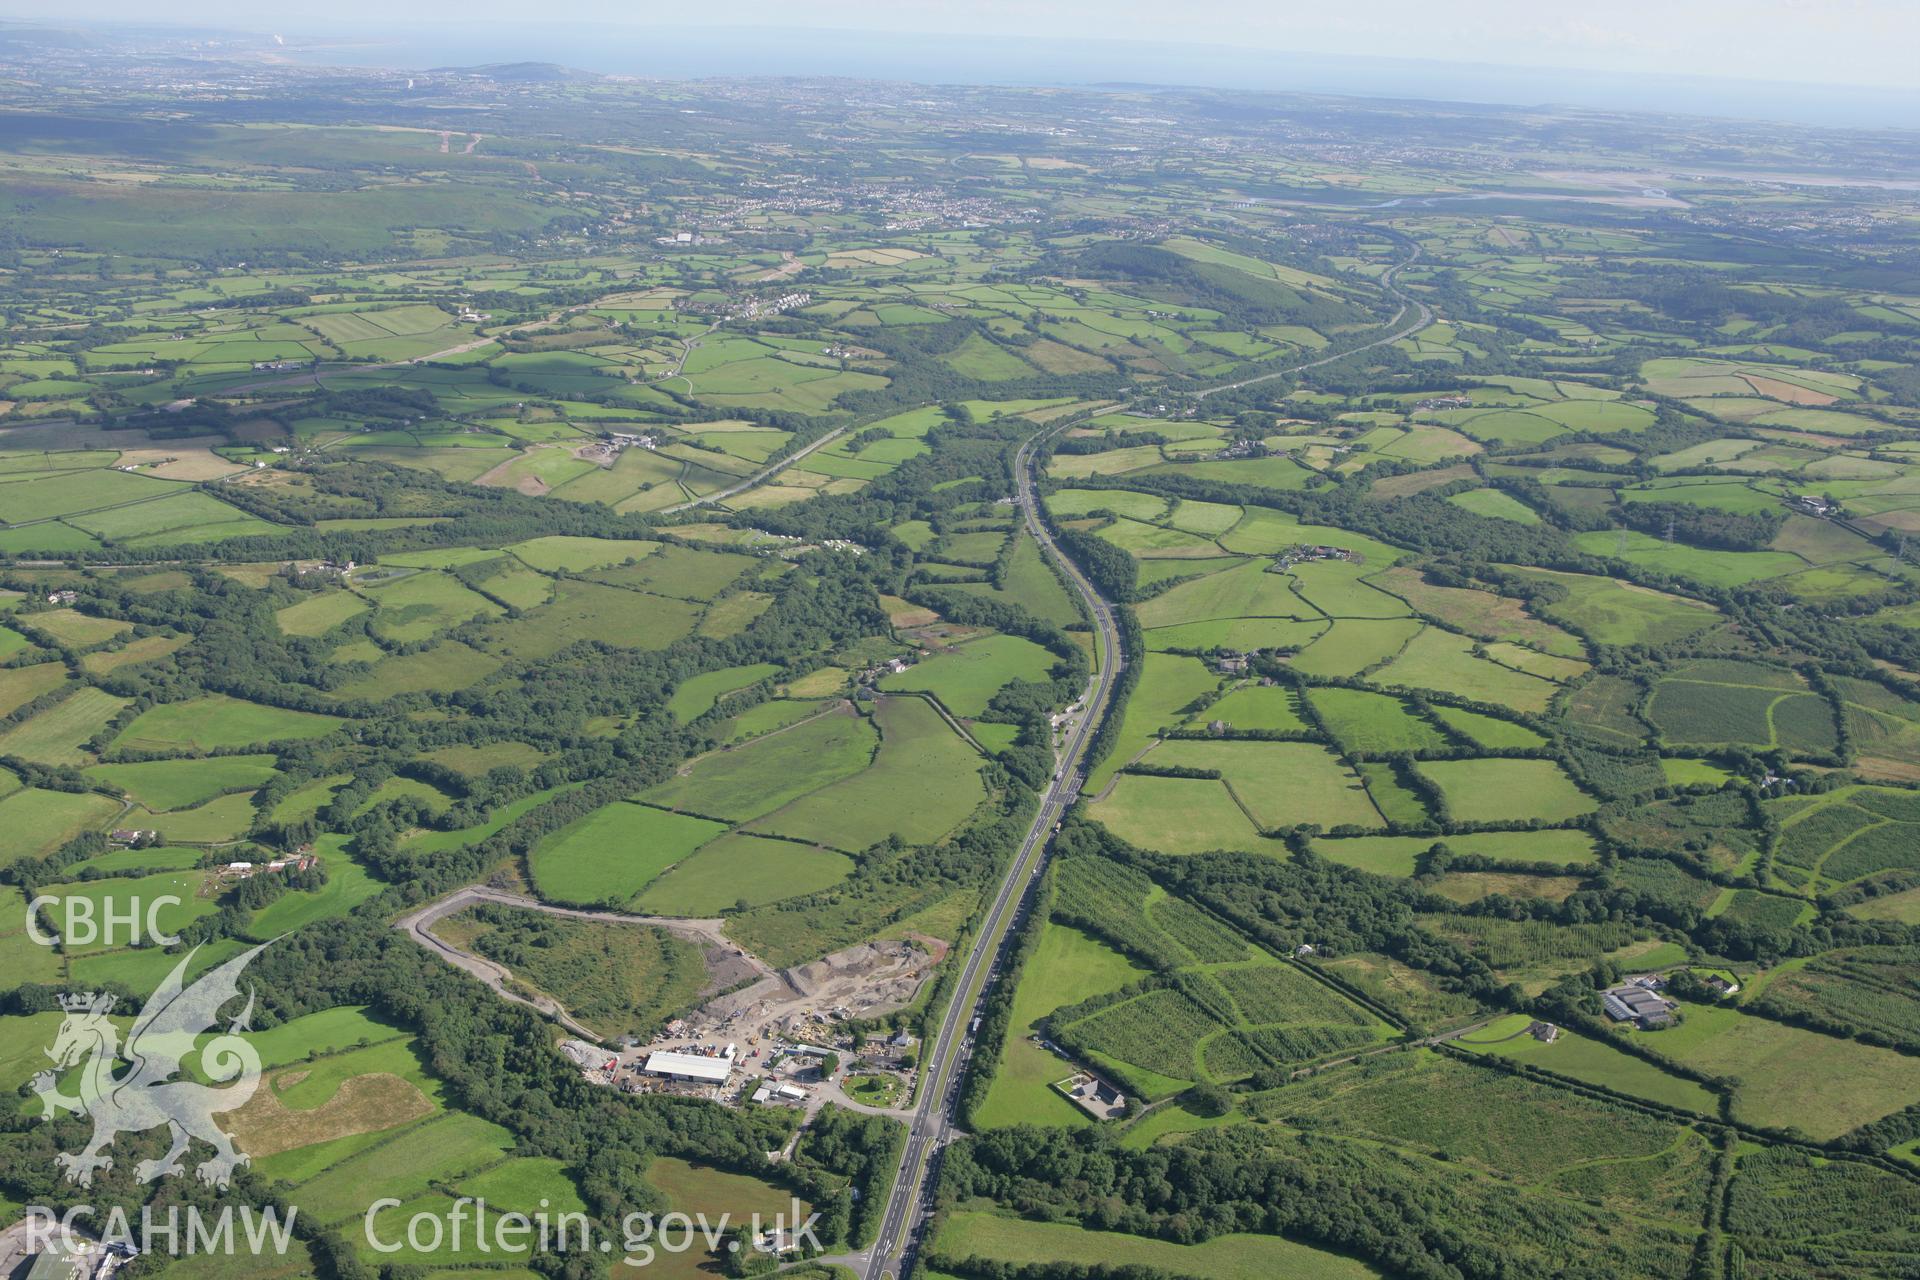 RCAHMW colour oblique aerial photograph of A48/M4, looking towards the south Taken on 30 July 2007 by Toby Driver